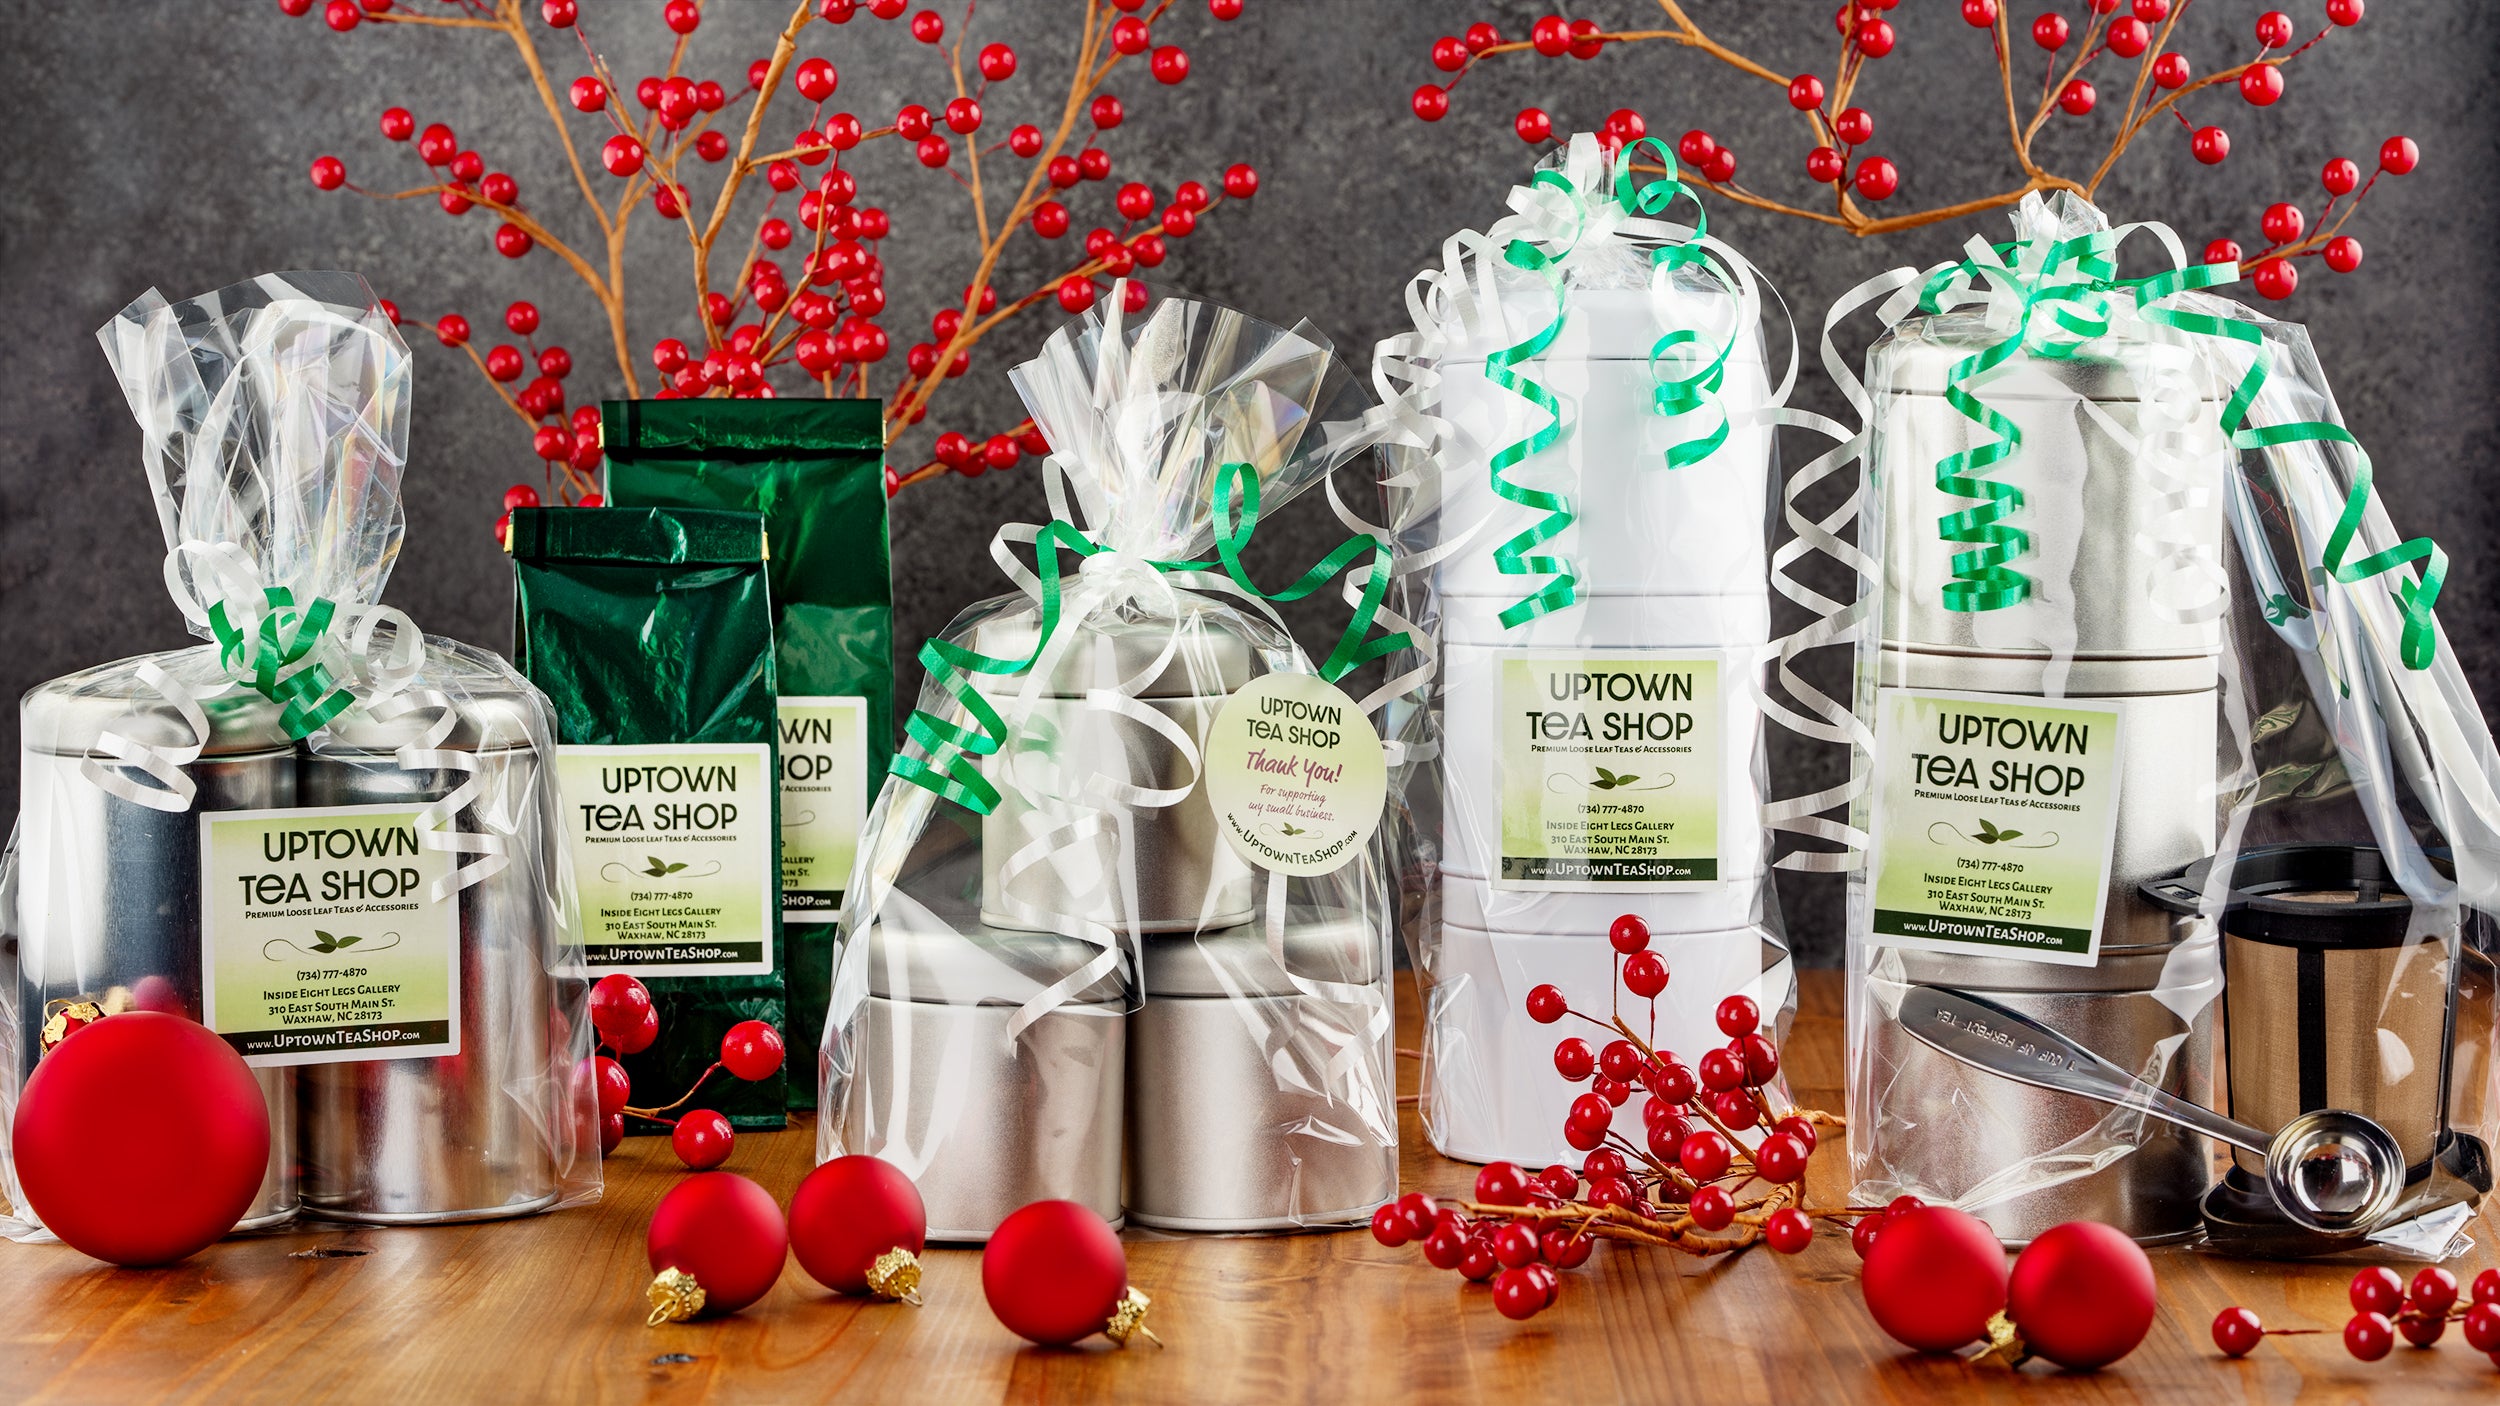 Uptown Tea Shop - Premium Loose Leaf Teas and Accessories | Gift Sets | Christmas